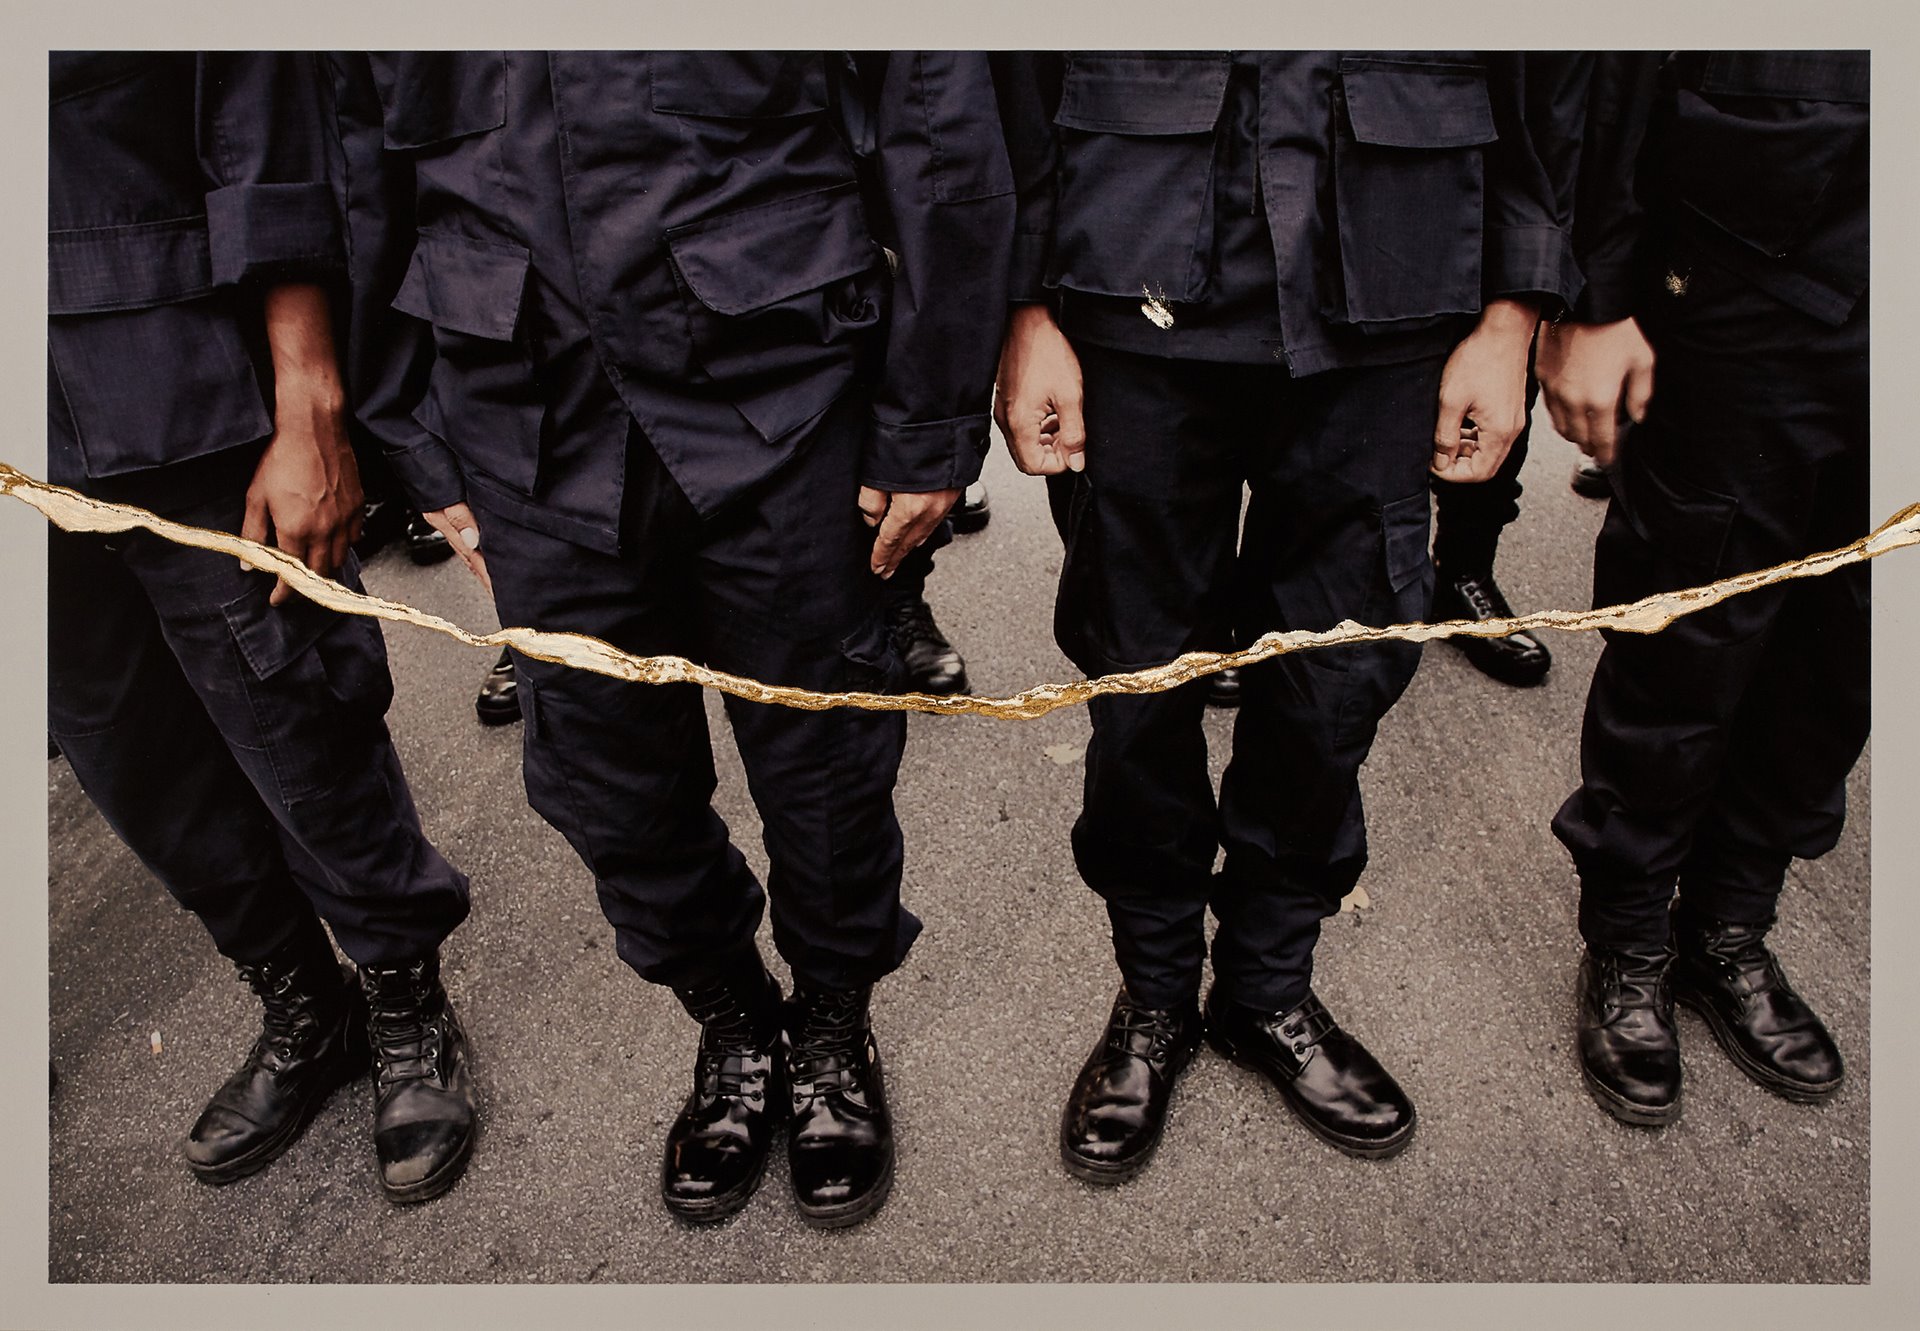 <p>Legs of policemen during a protest in Bangkok, Thailand. According to the photographer, the golden scars on the images represent resilience against the suppression of knowledge, and the possibility of a more beautiful future.</p>
